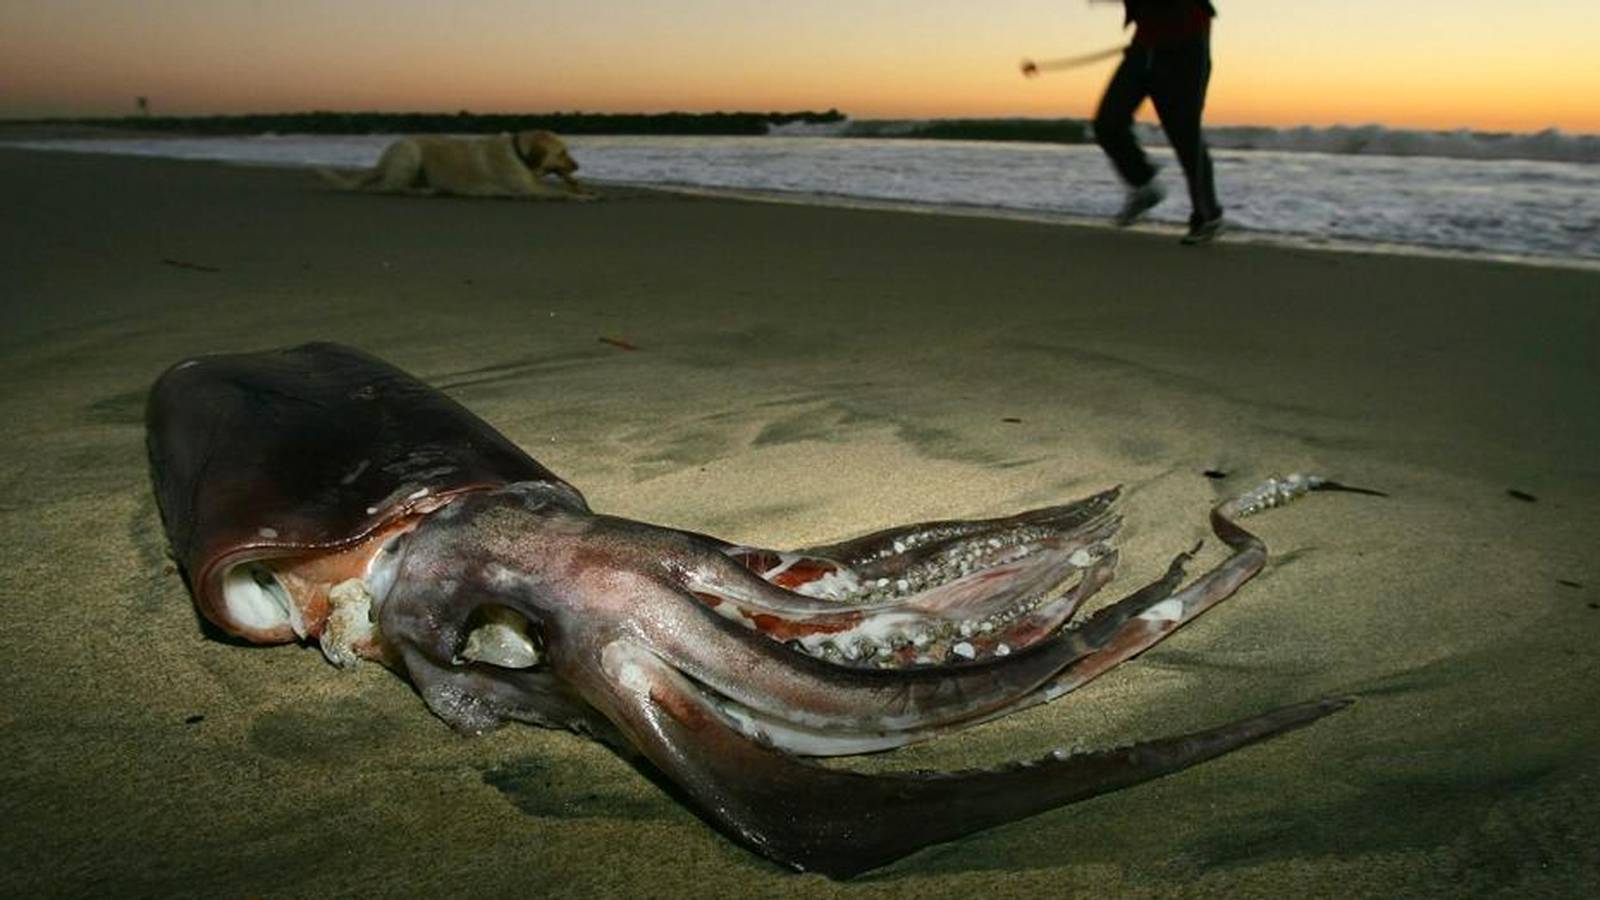 Giant squid 14 feet long washes ashore on New Zealand beach WPXI